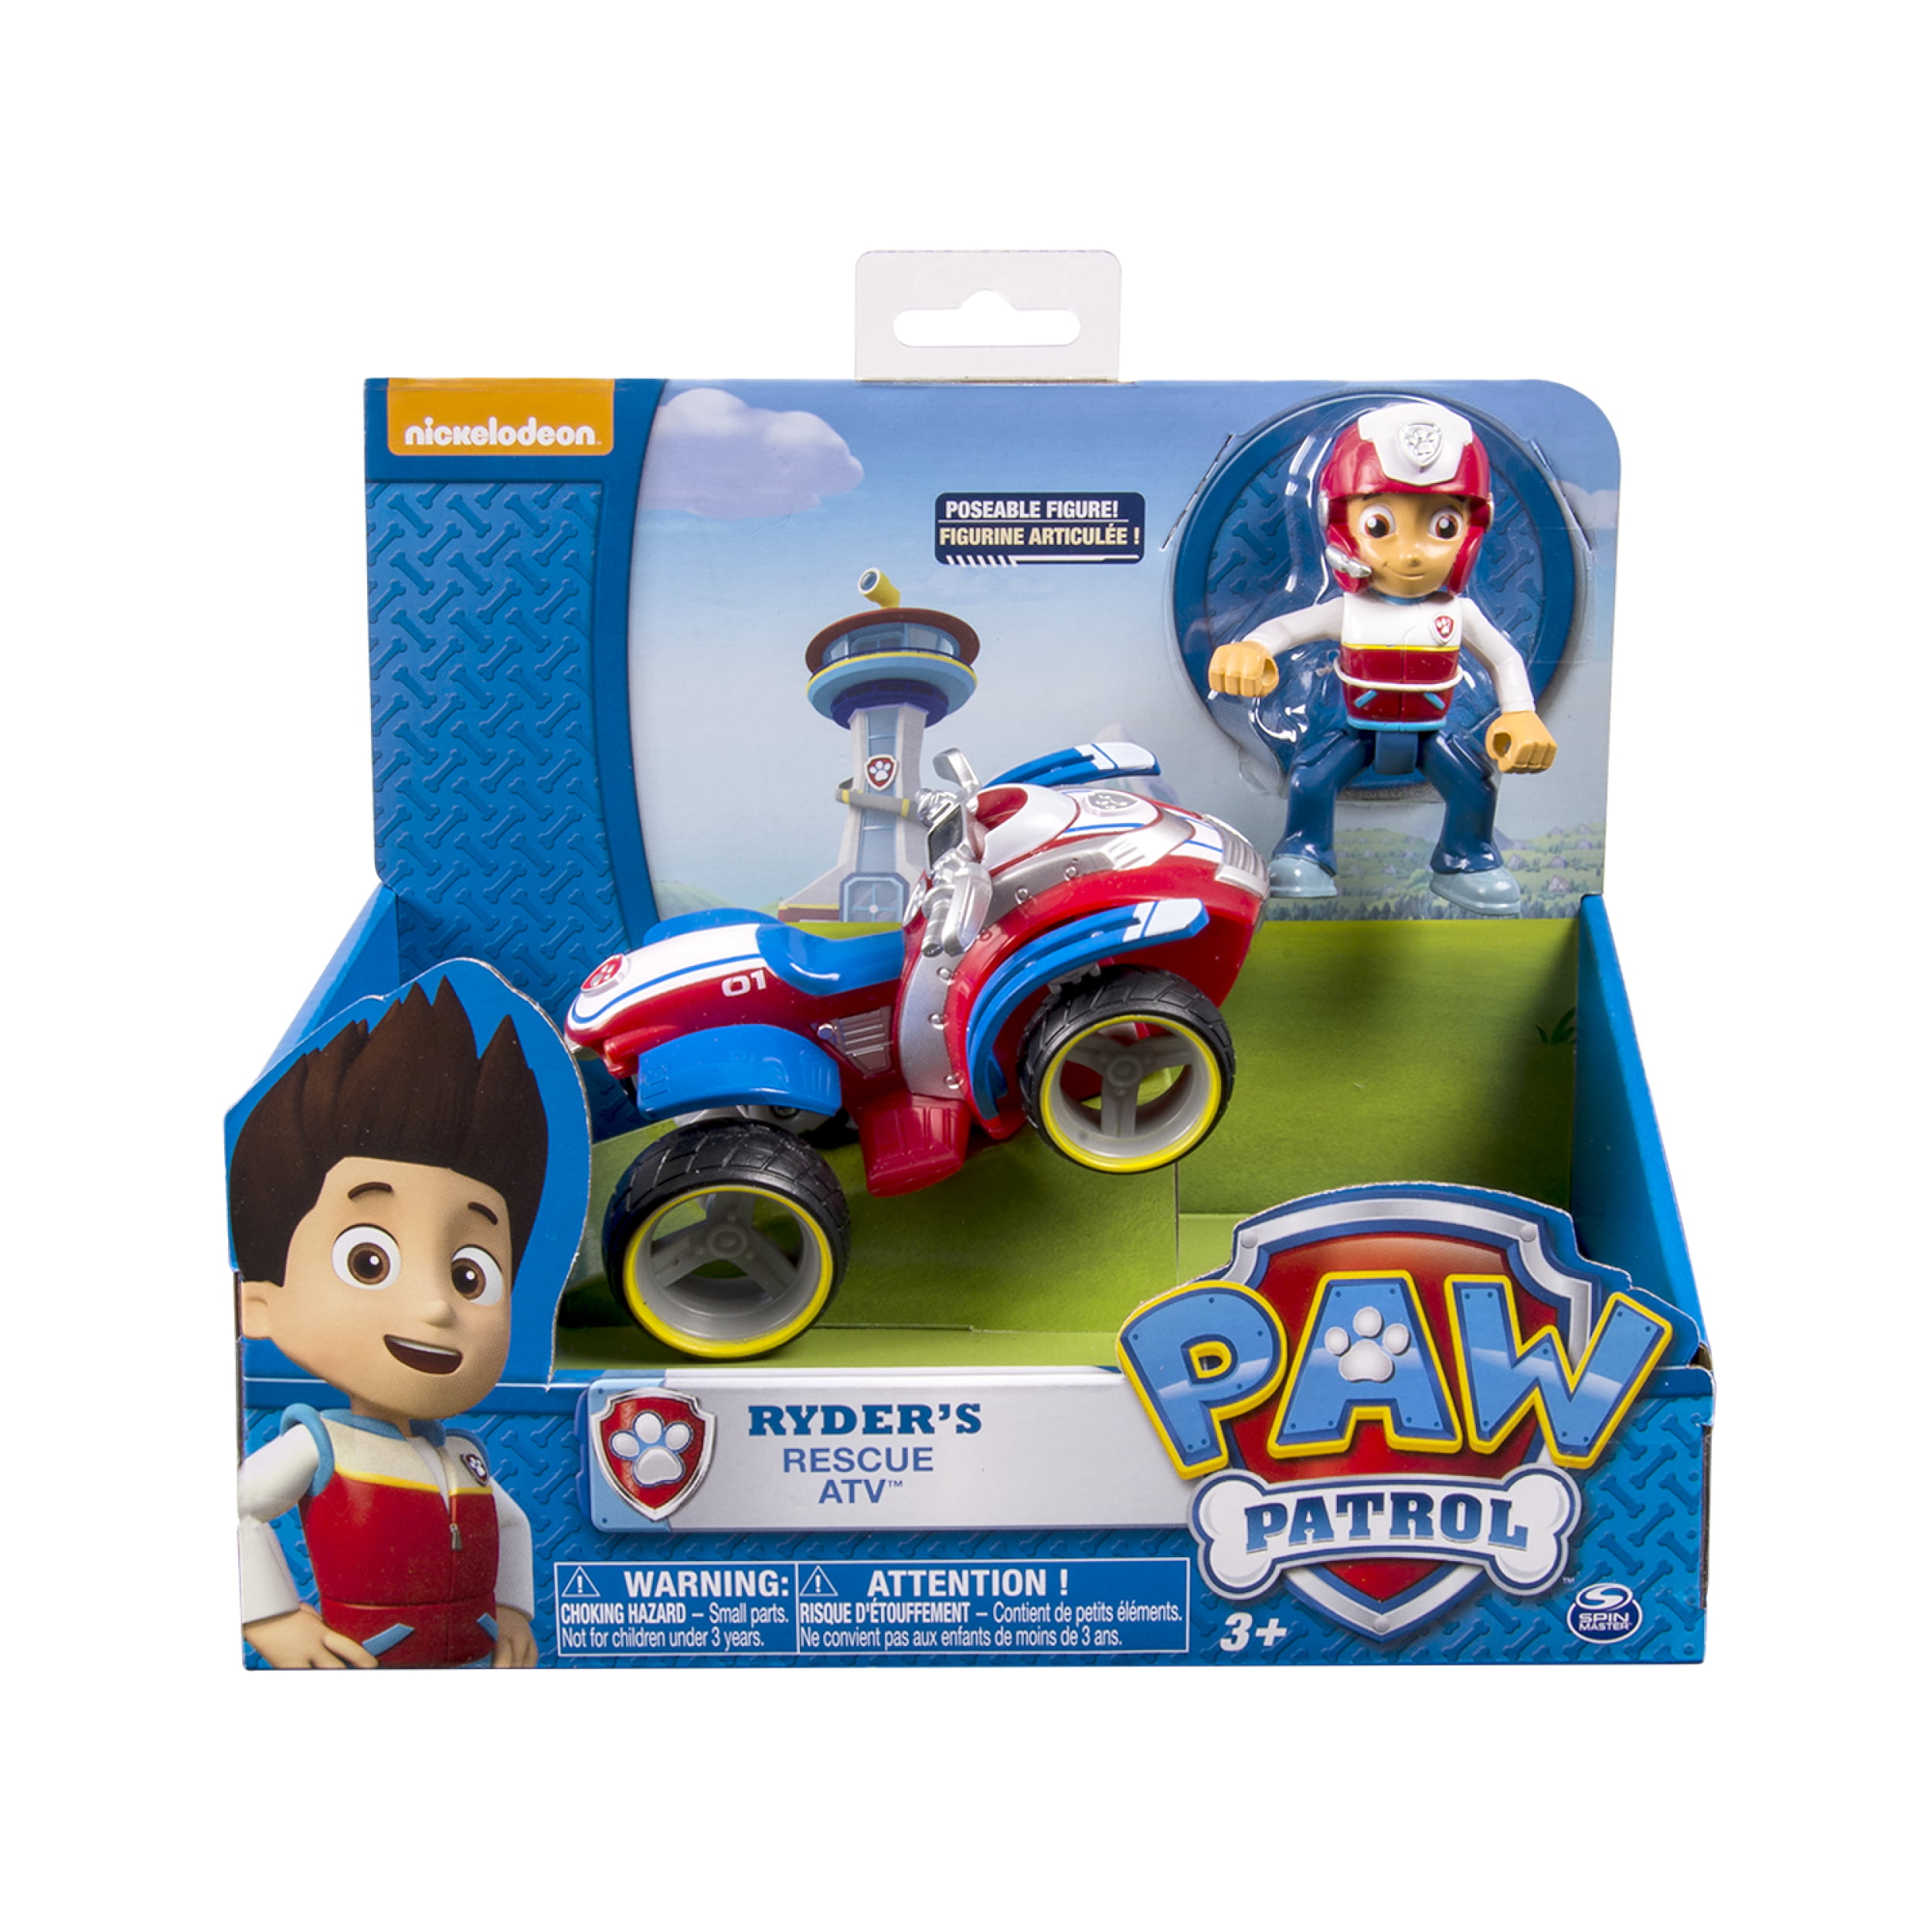 Paw Patrol toys Ryder/'s Rescue ATV Vehicle and Figure figure toy Puppy Dog Toys